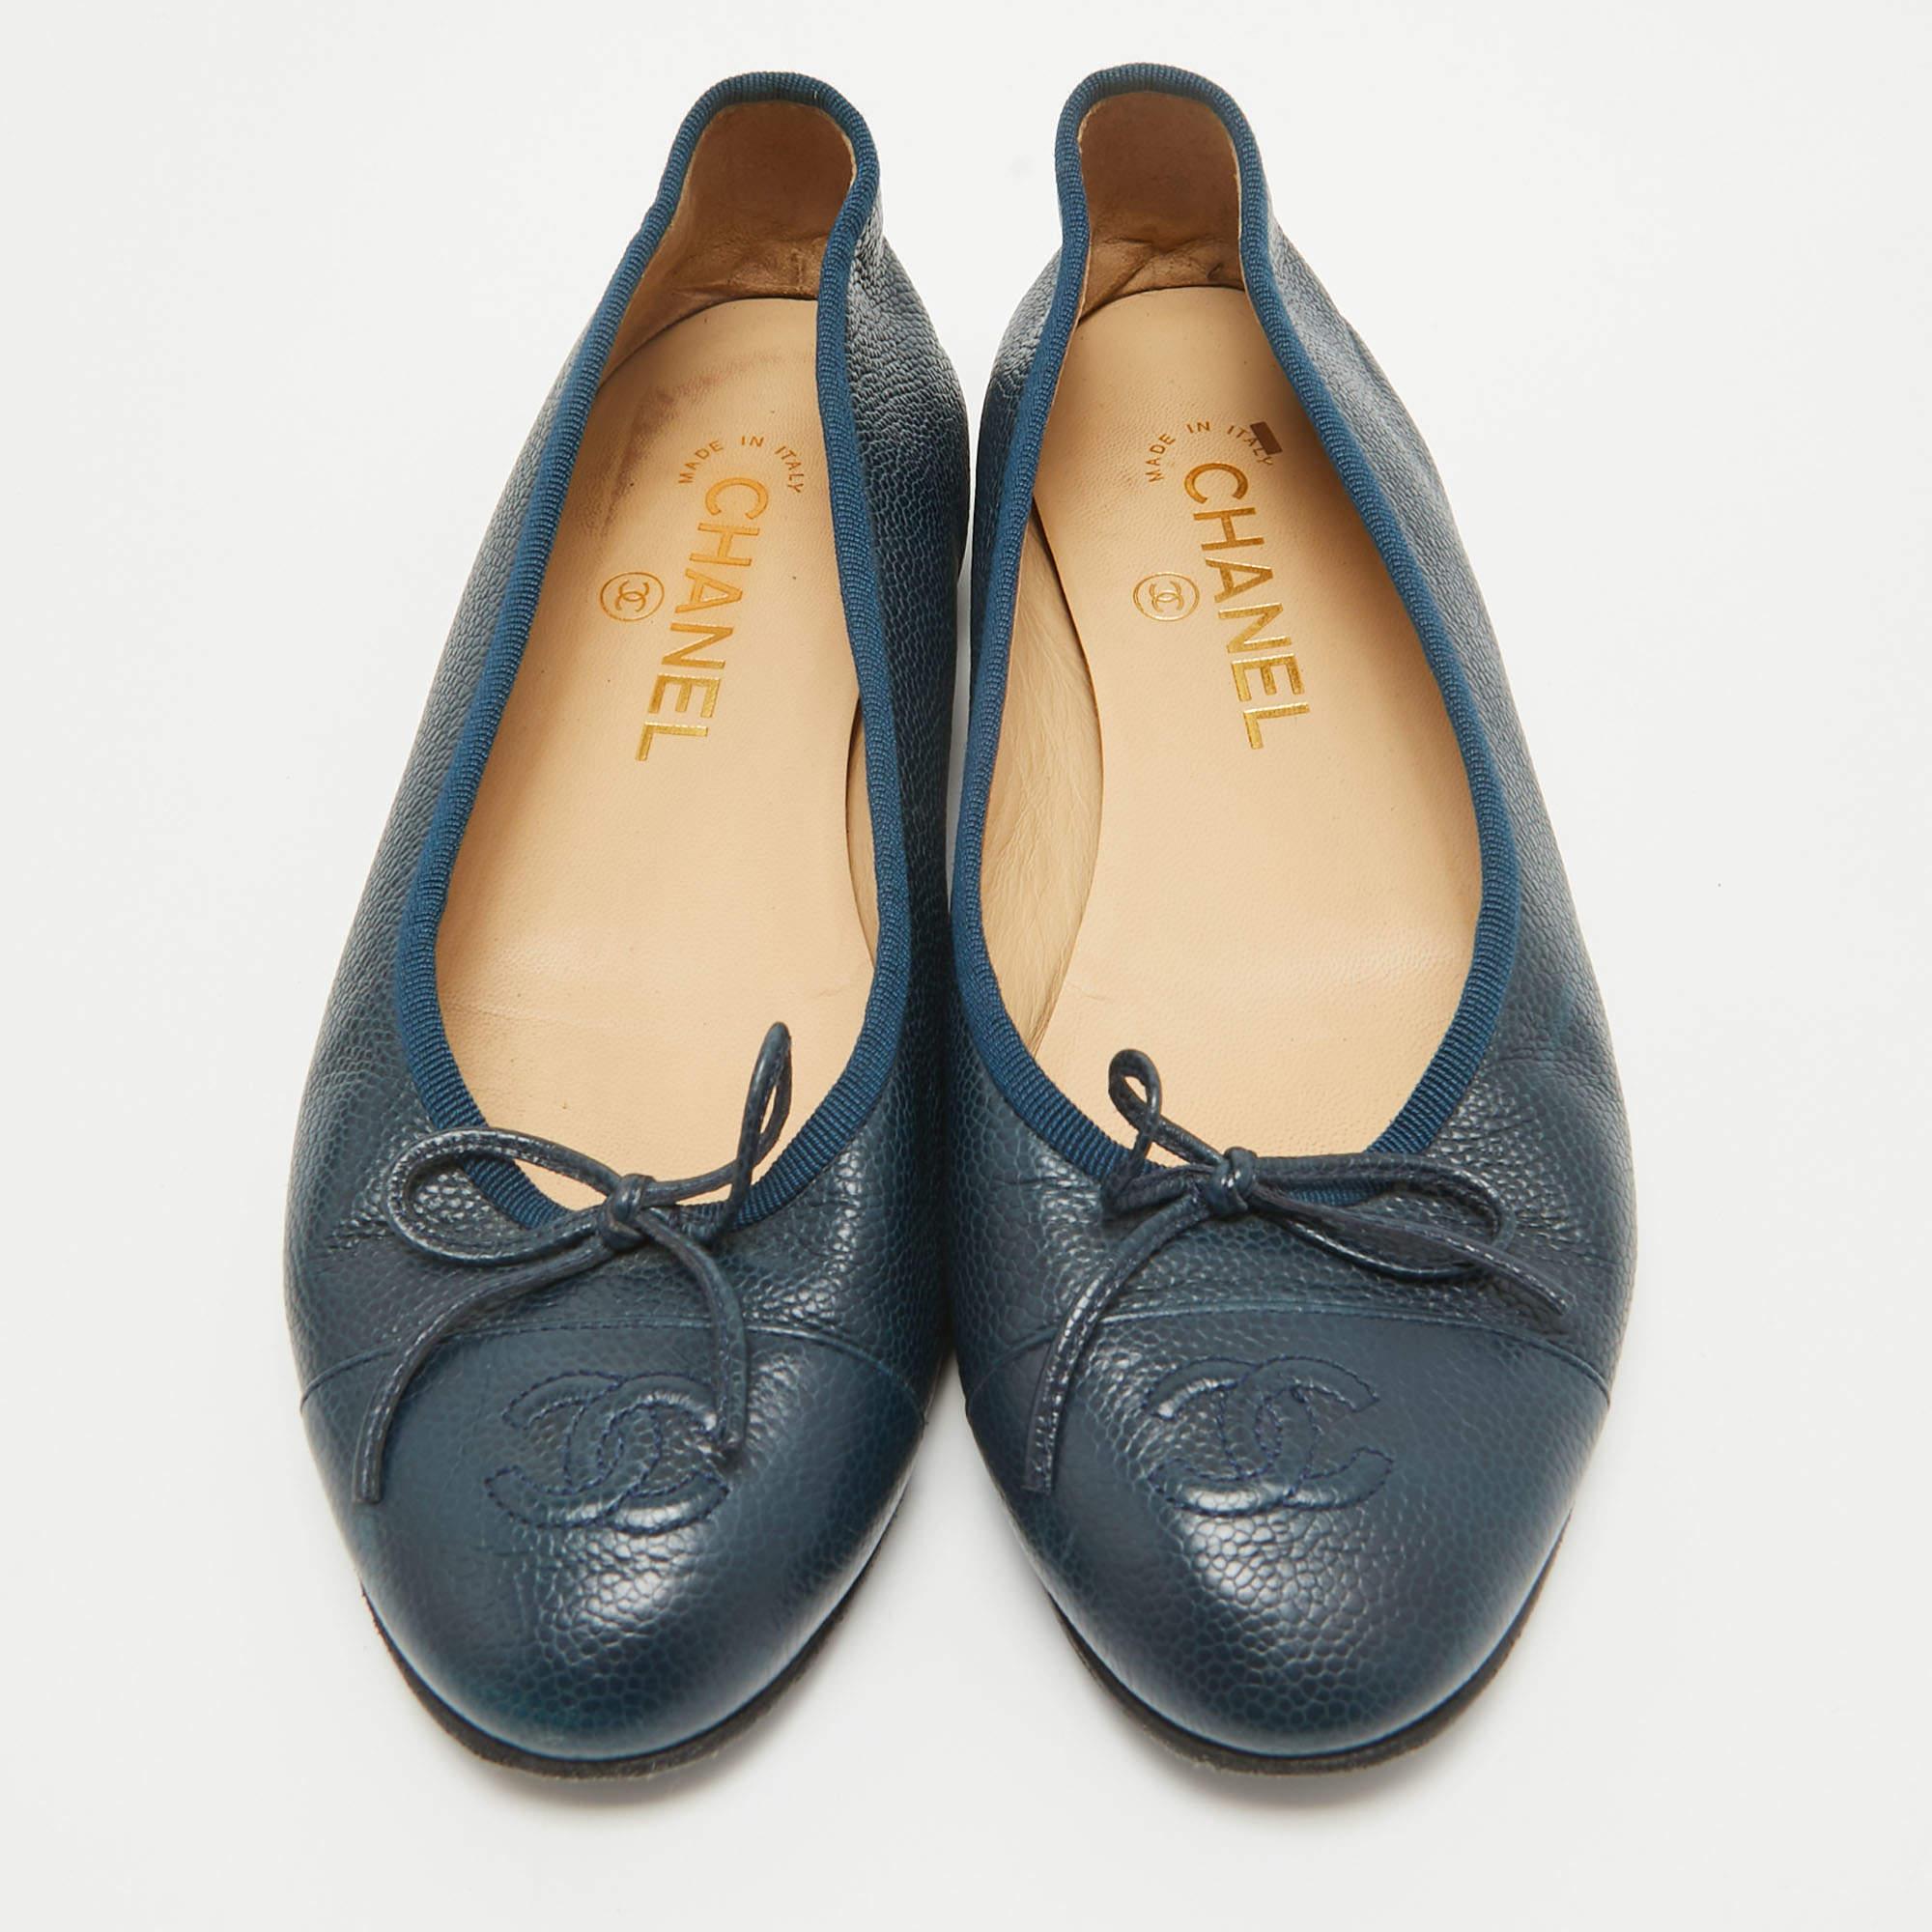 Defined by comfort and effortless style, no wardrobe is ever complete without a pair of chic ballet flats. This pair is lovely to look at and is equipped with elements like a comfortable insole and a durable sole.

Includes
Original Dustbag